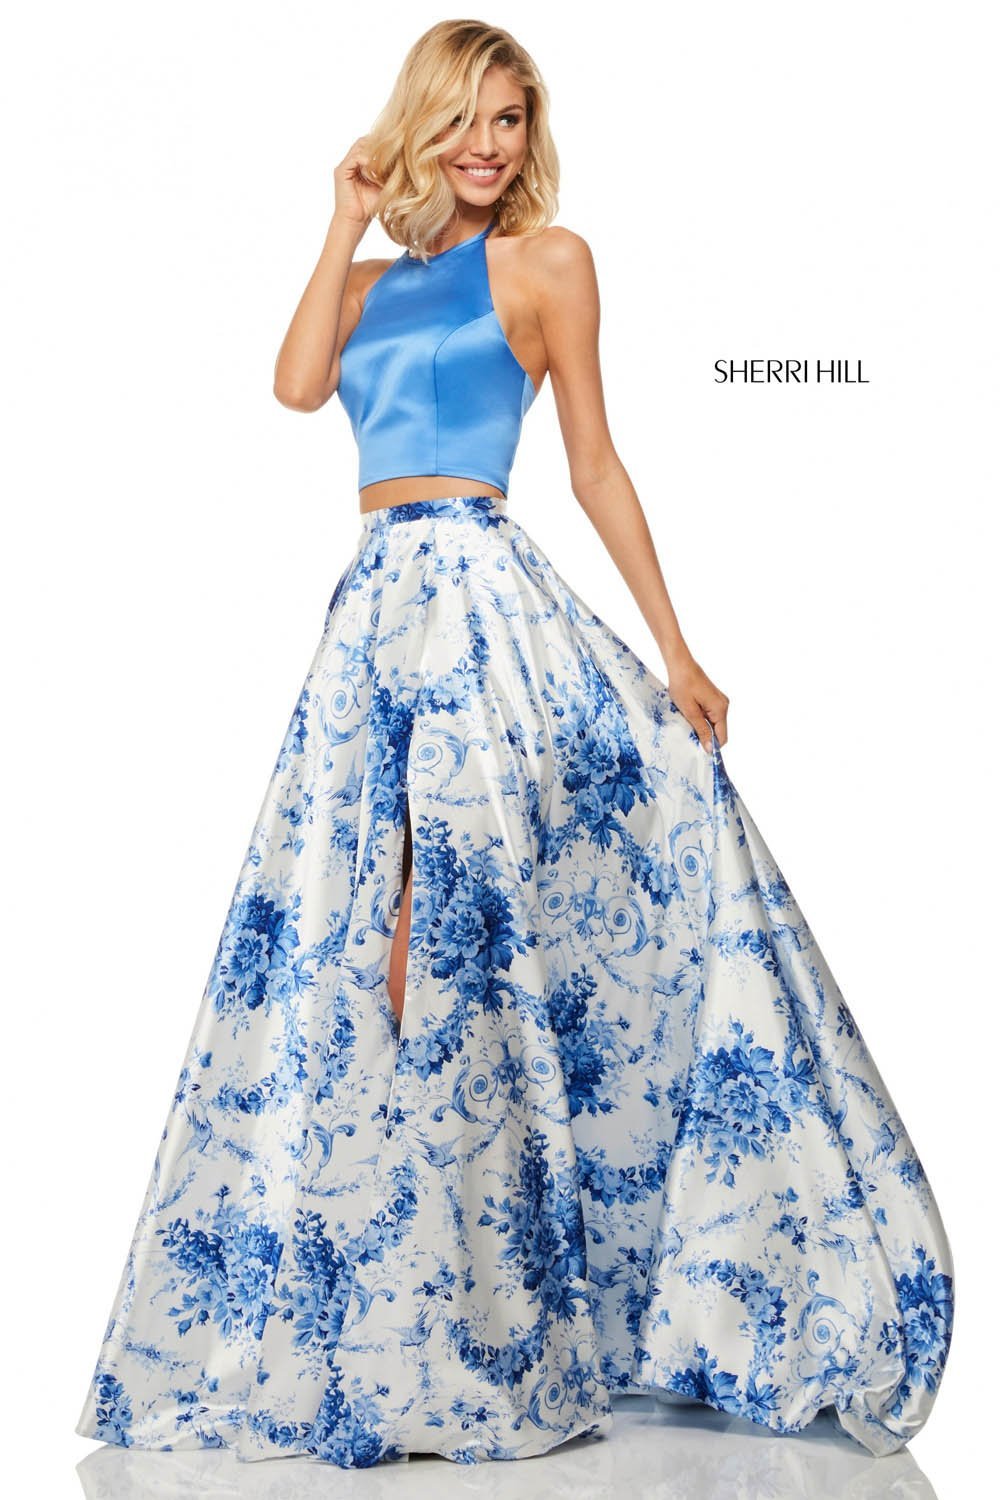 Sherri Hill 52894 dress images in these colors: Blue Ivory Print.